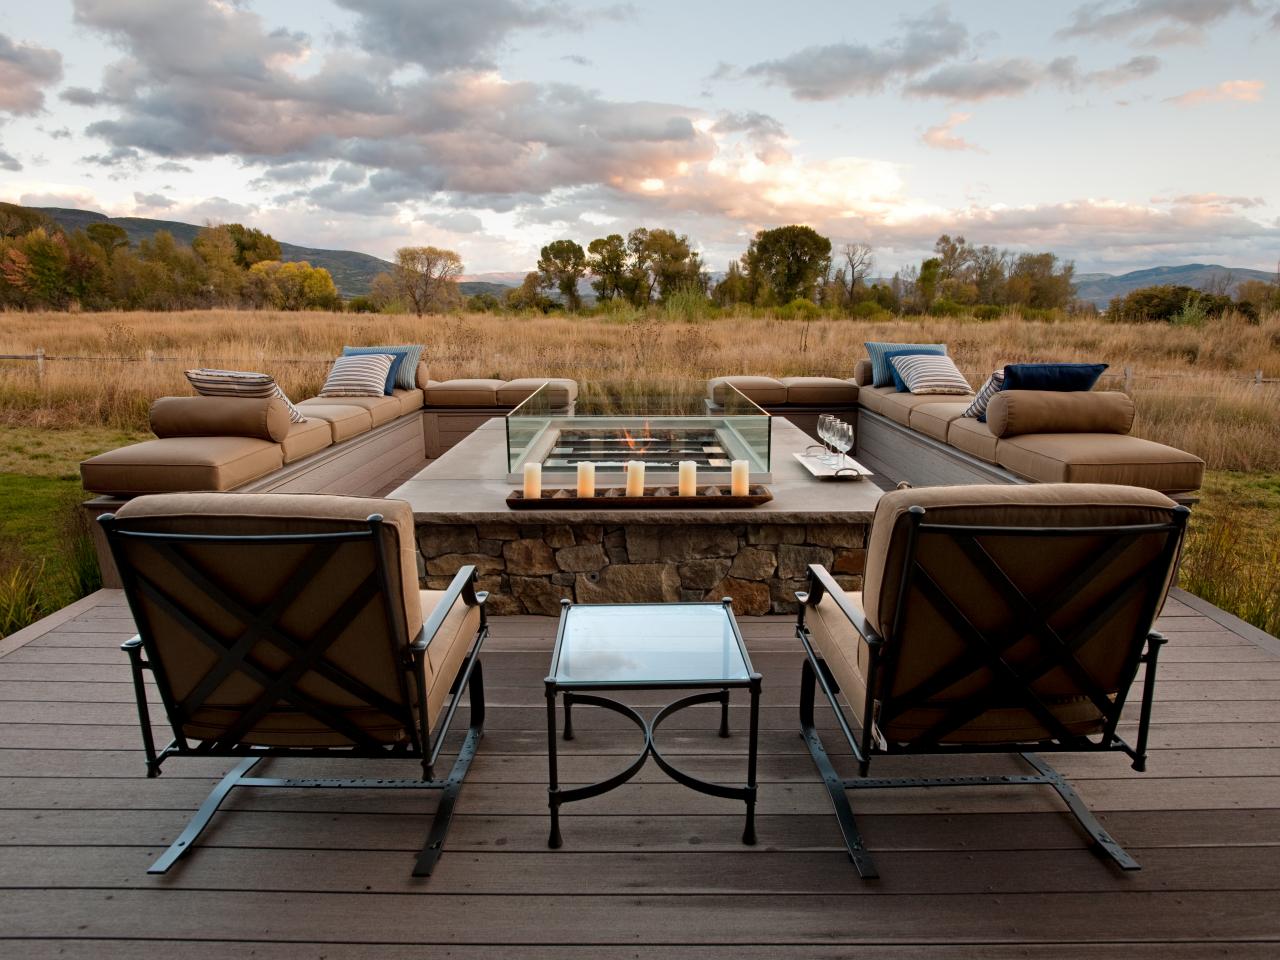 Tips and photos from the experts at HGTV on including gas fire pits into your patio designs.